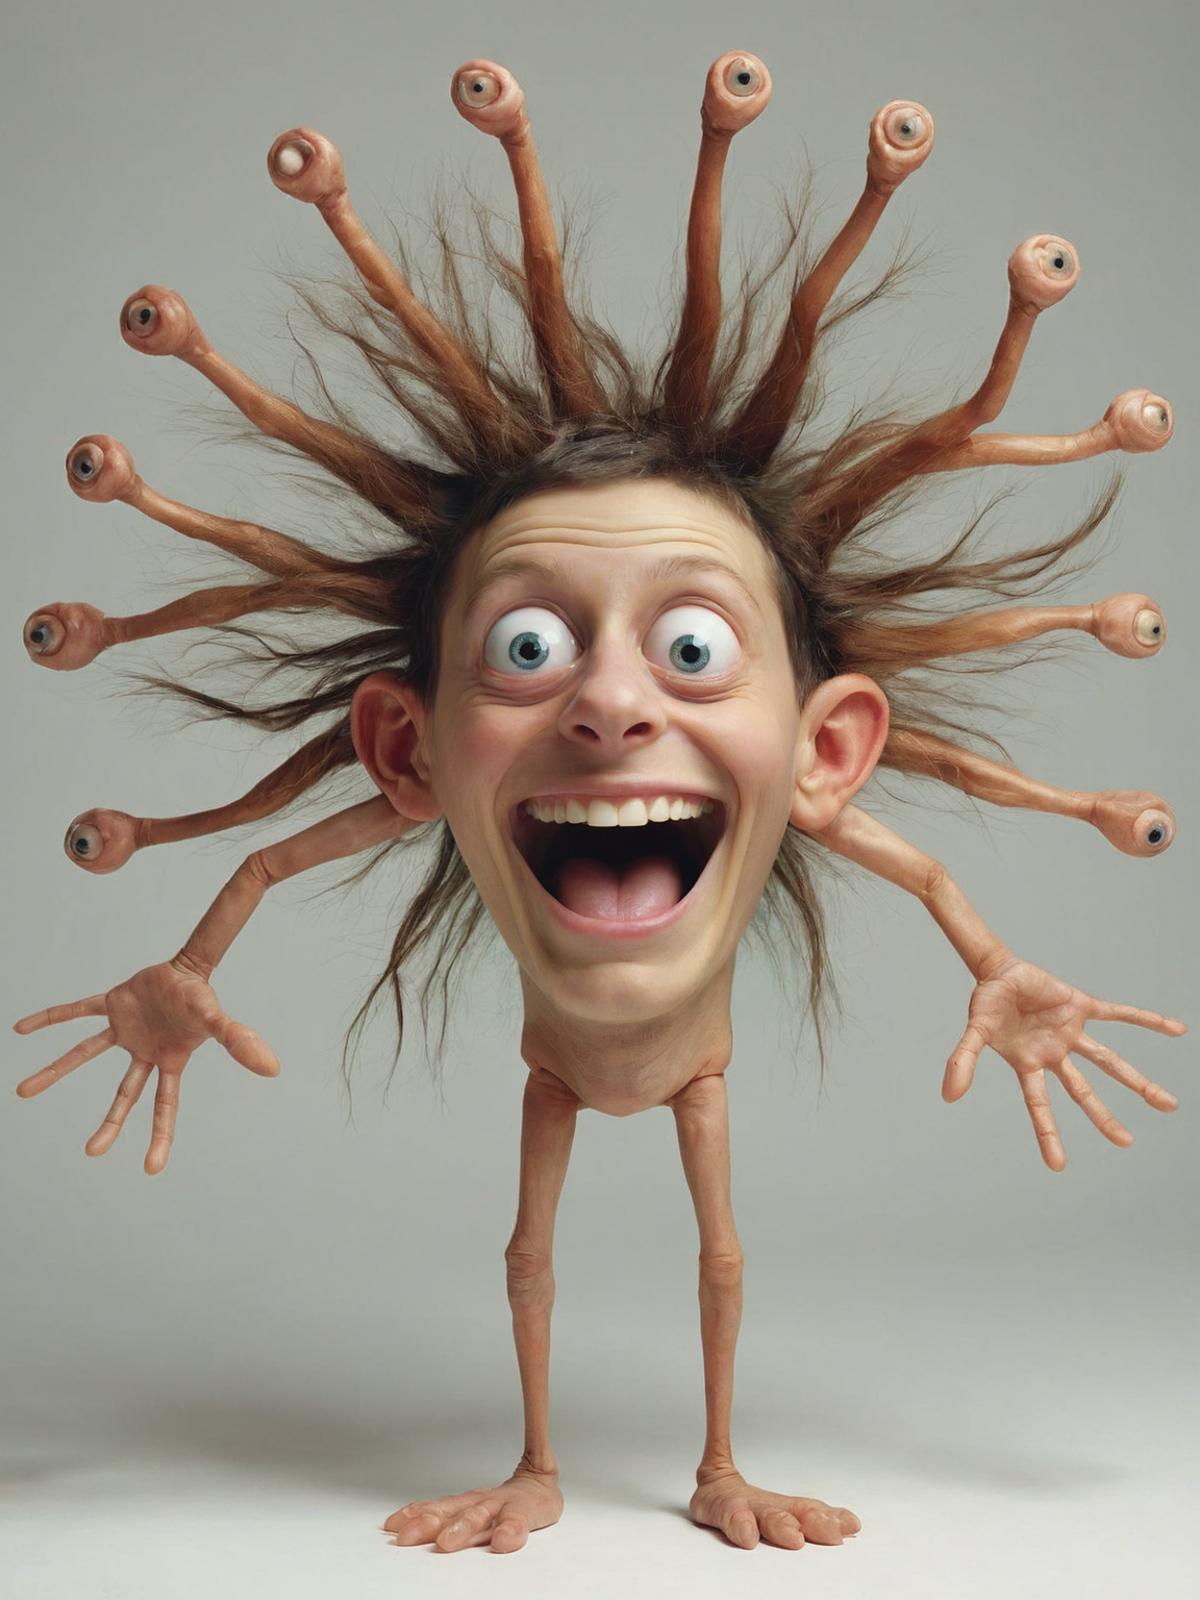 A Doll Head with Fake Eyes and Fake Hair, Mouth Open in Surprise.